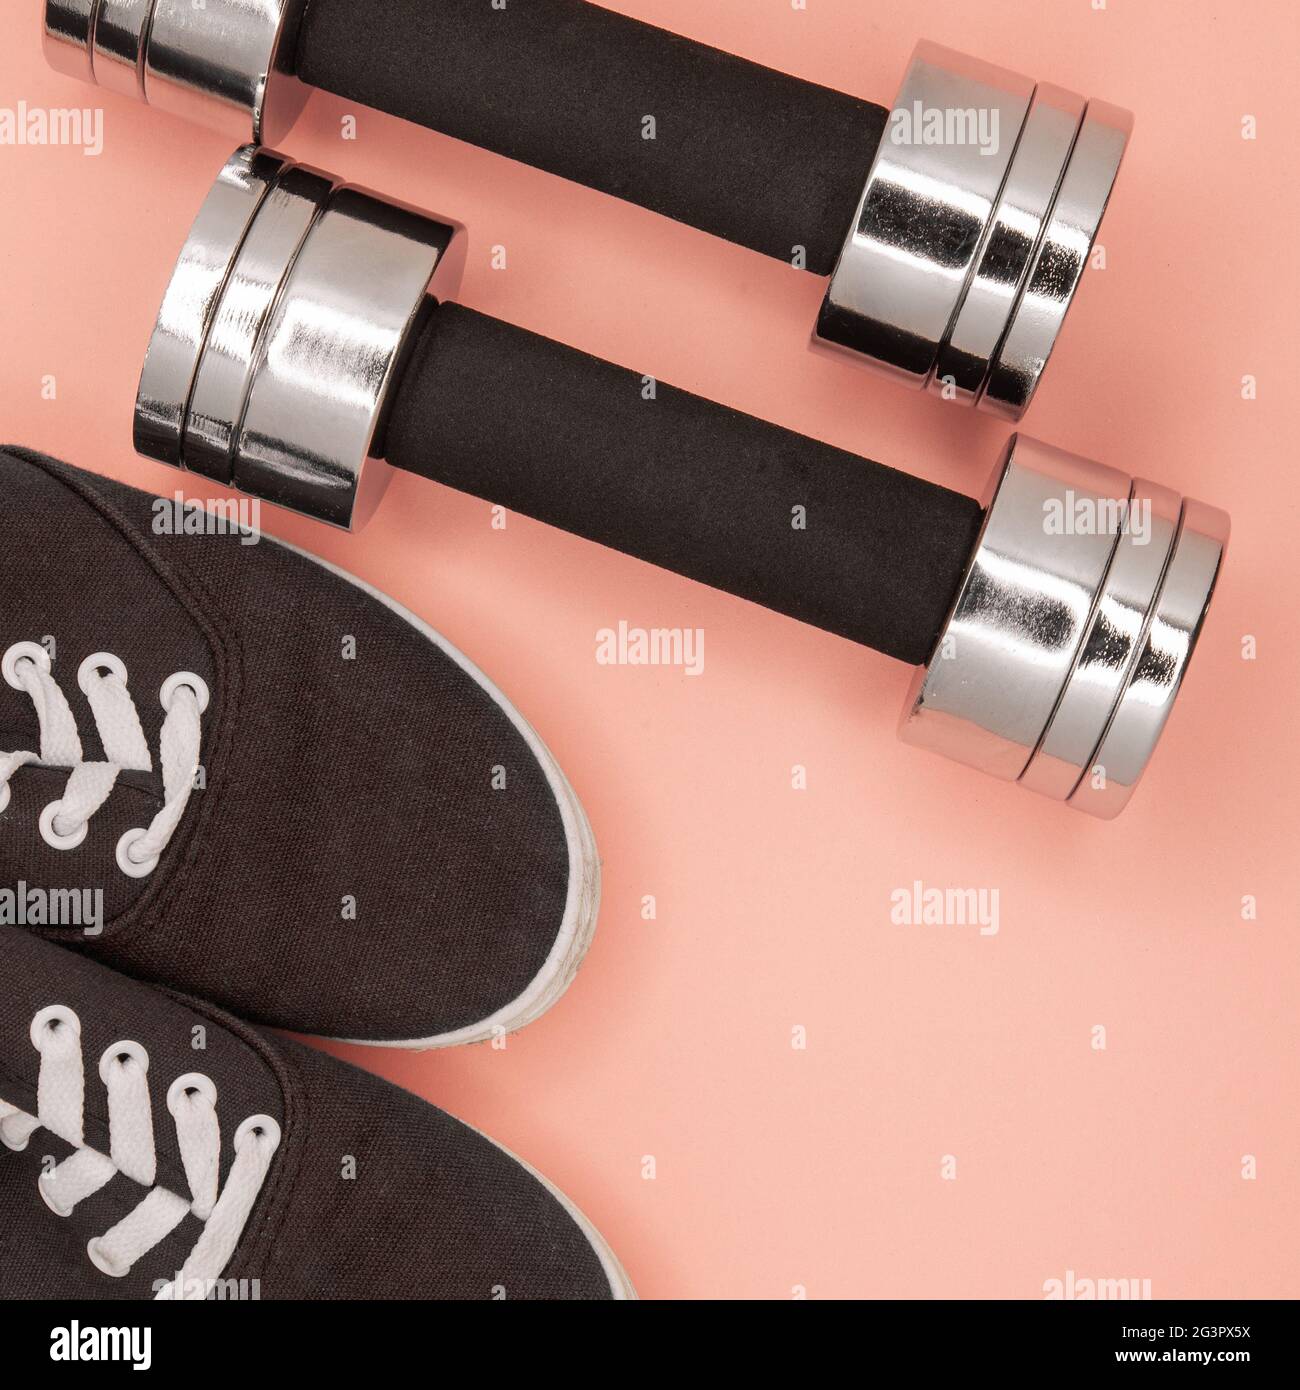 Metal small dumbbells and sneakers for training on a pink background. Stock Photo